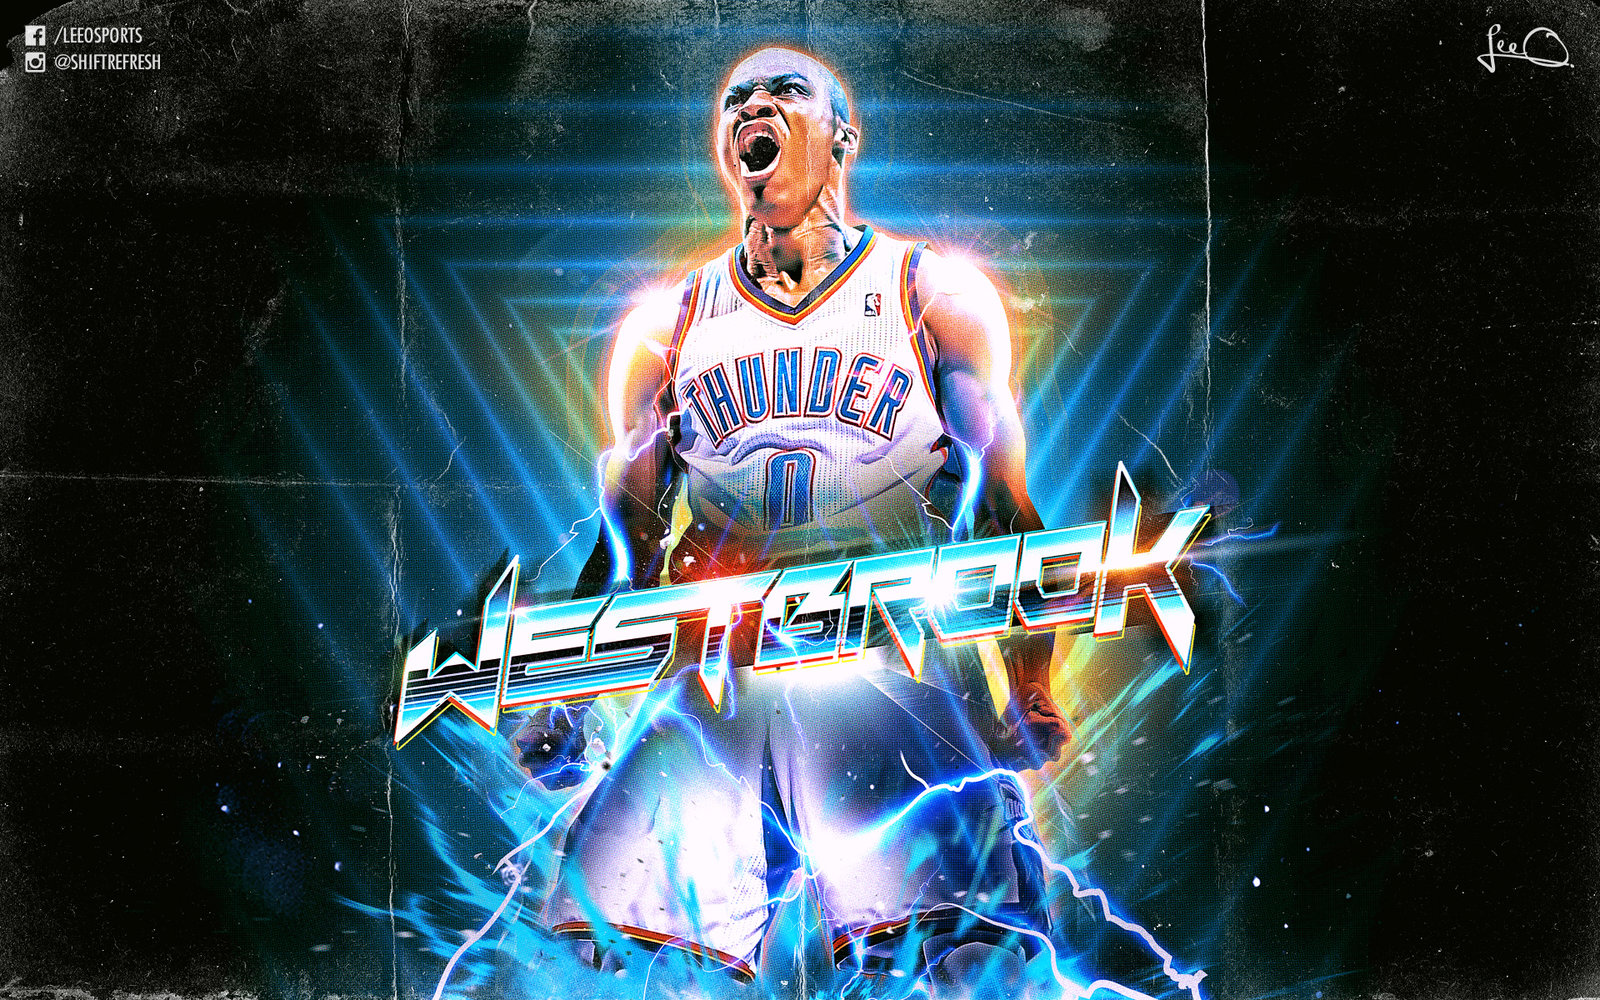 Russell Westbrook Retro Nba Wallpaper By Skythlee On